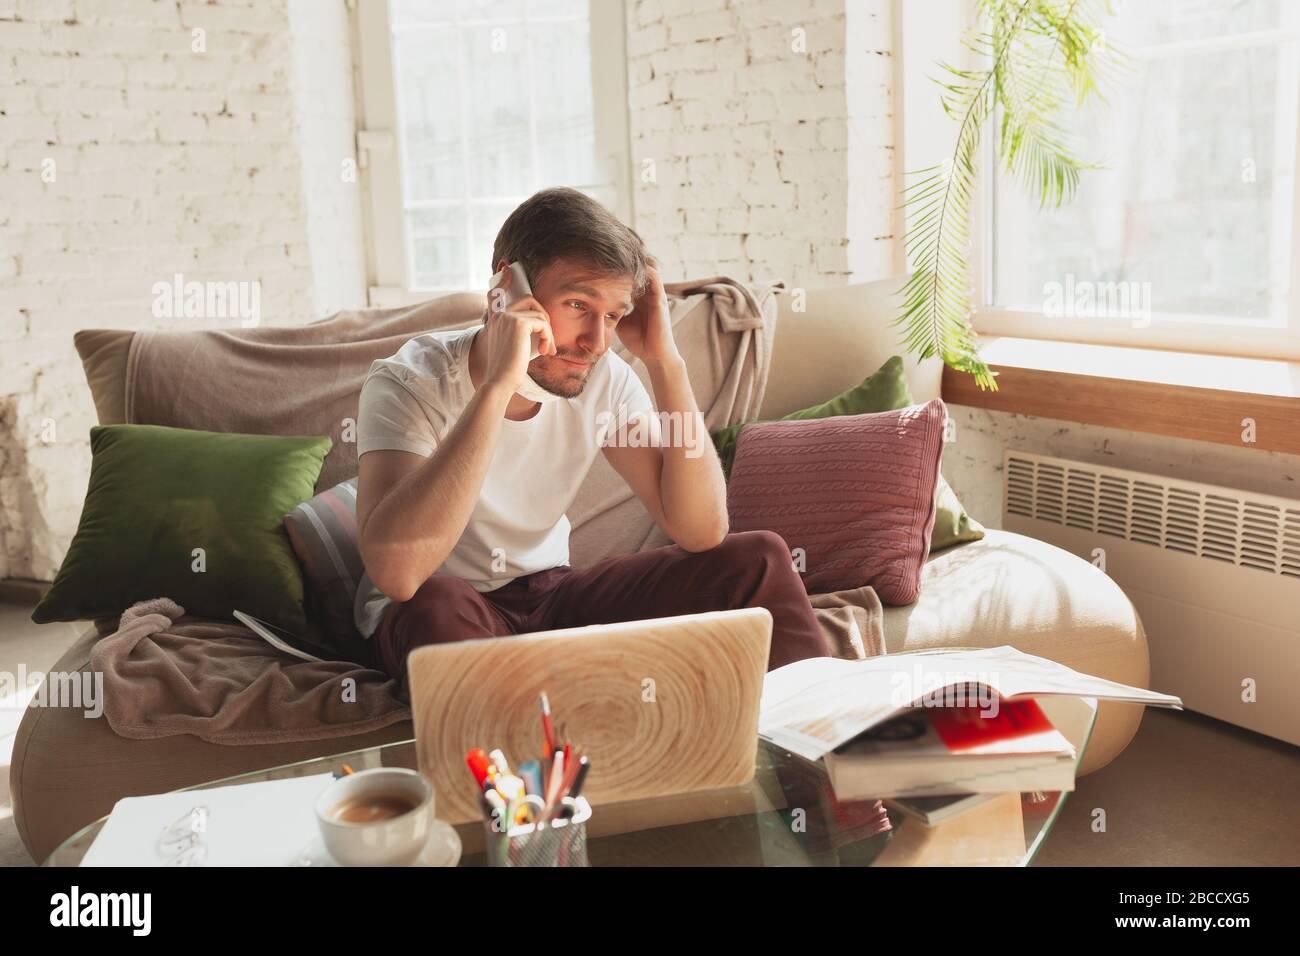 Young man studying at home during online courses for designers, SMM, SEO, analytics. Getting profession while isolated, quarantine against coronavirus spreading. Using laptop, smartphone, headphones. Stock Photo